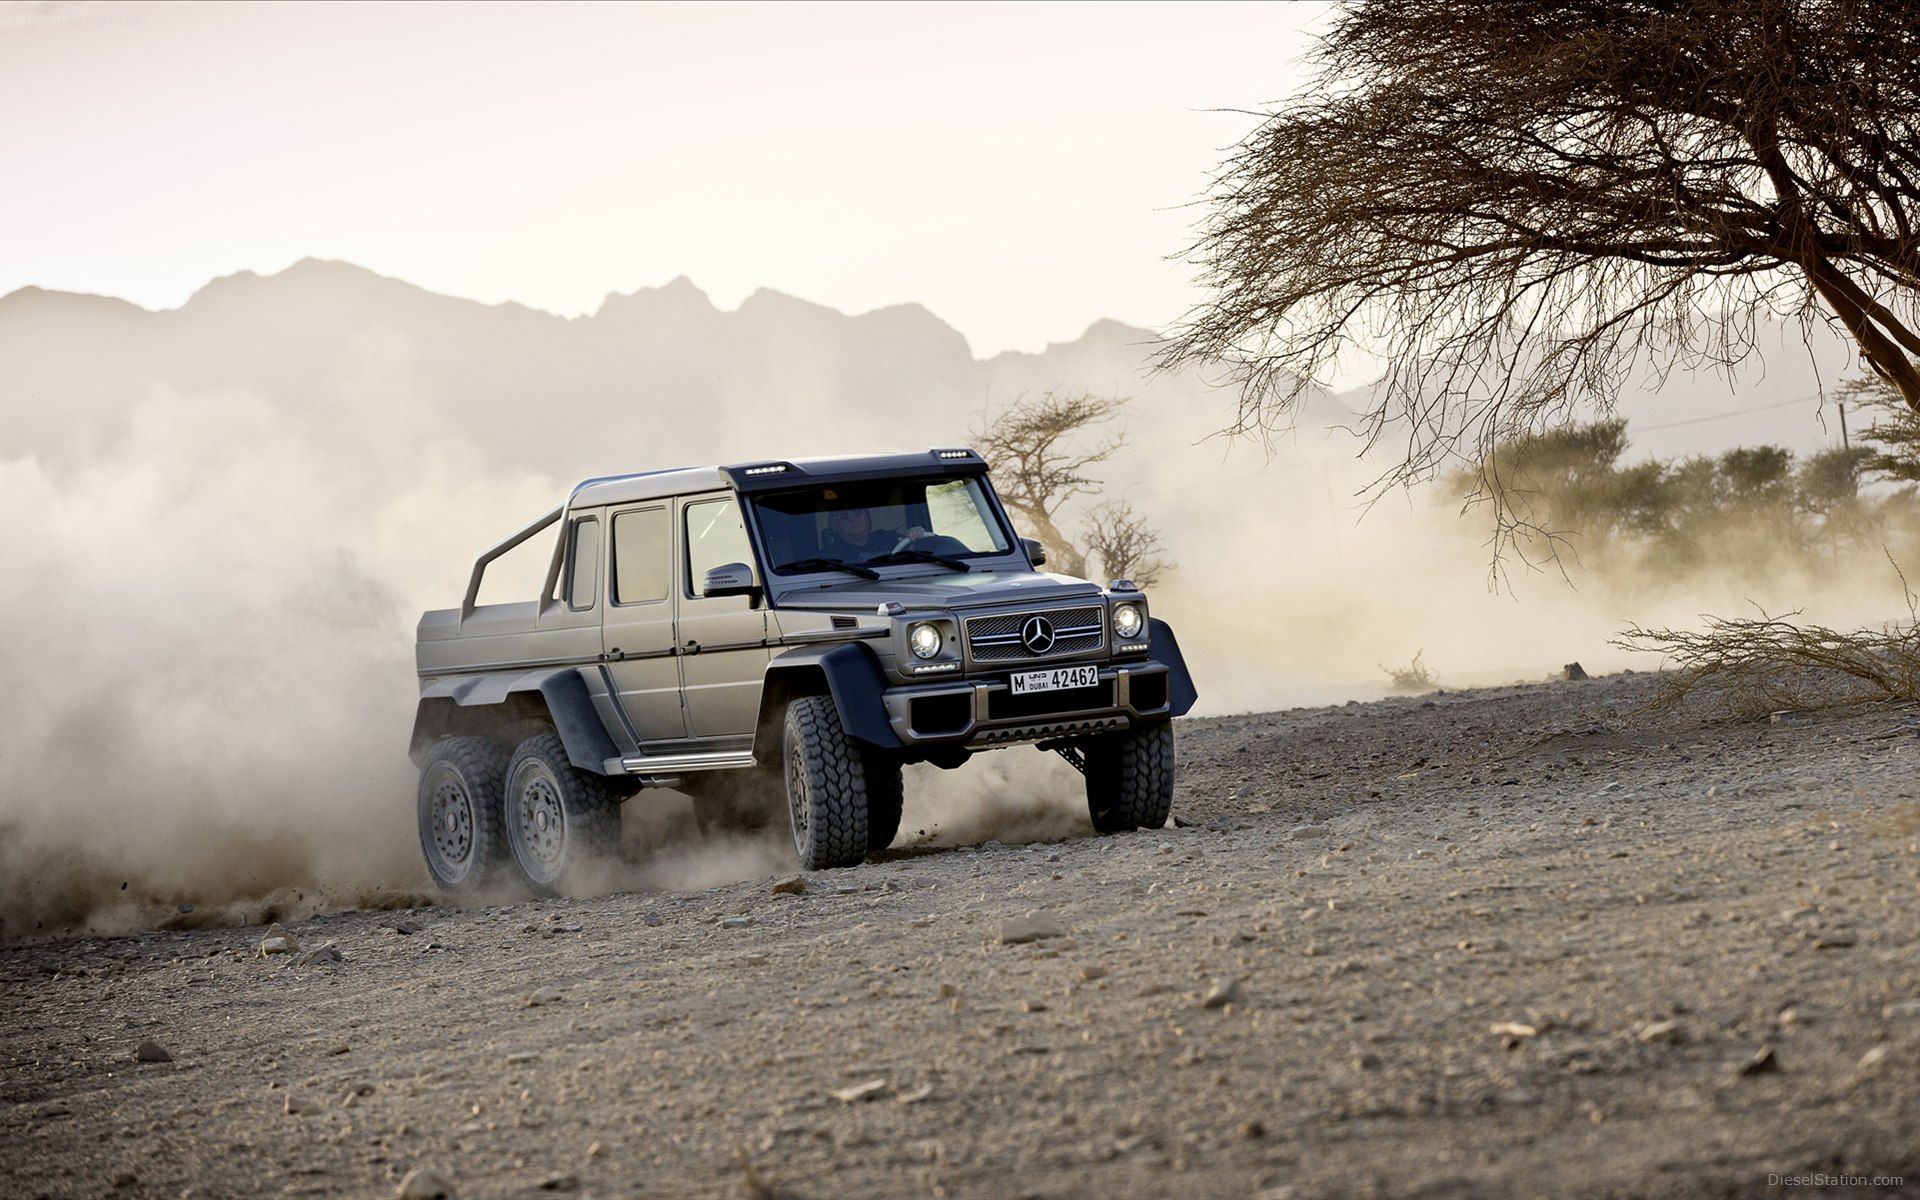 Mercedes Benz G63 AMG 6X6 Concept 2013 Widescreen Exotic Car Wallpaper Of 94, Diesel Station